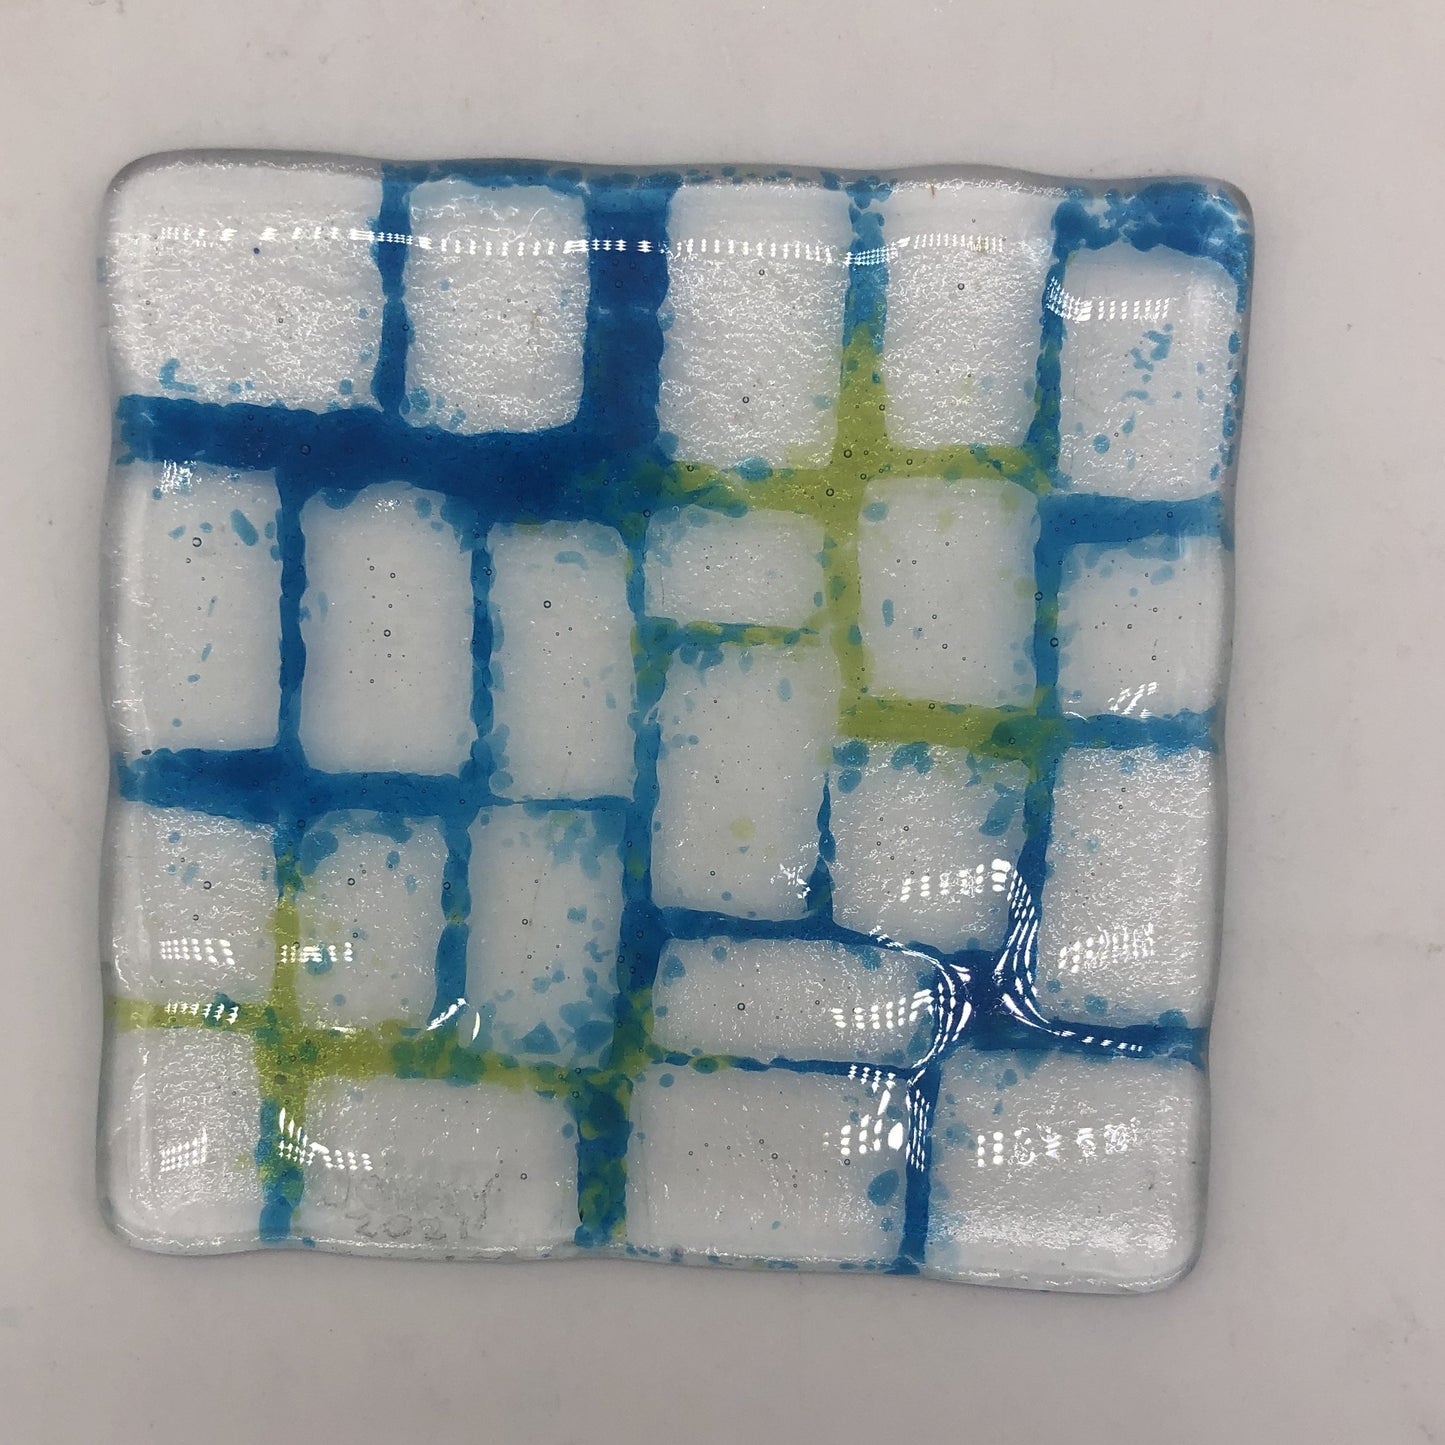 Clear square piece of glass with rectangles of clear and blue and green in the seams, mimicking grout.